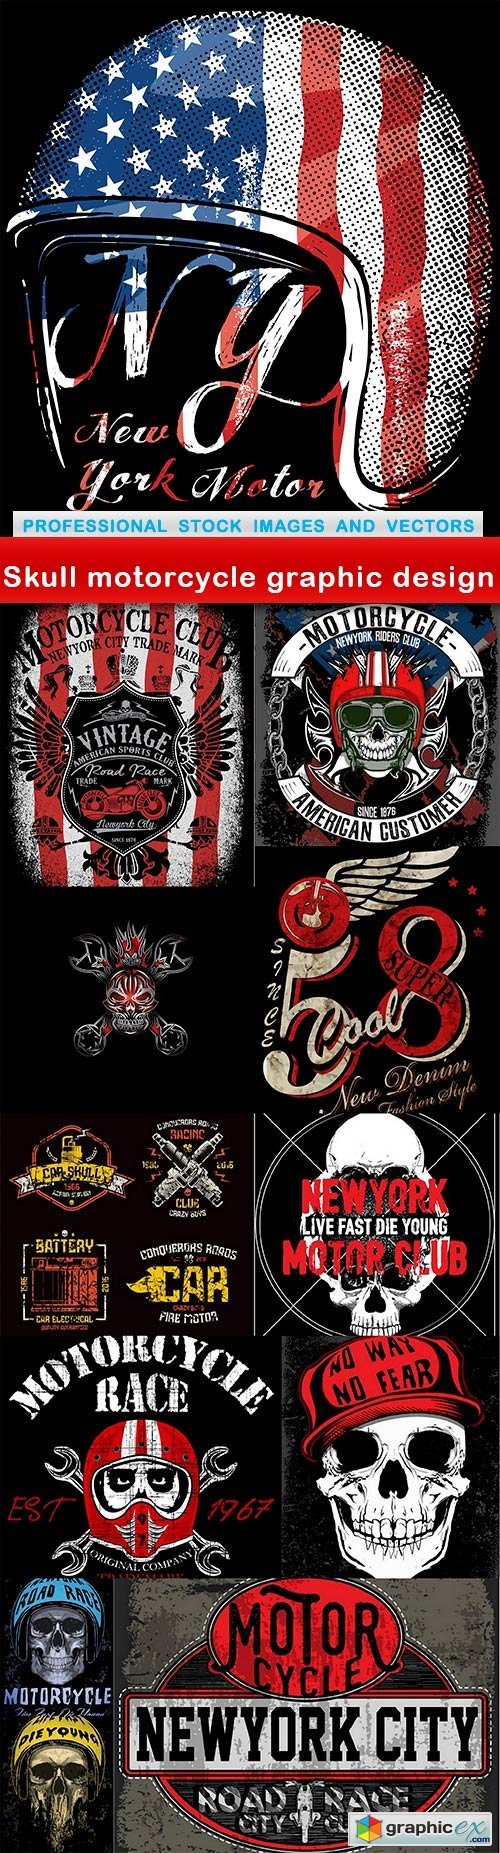 Skull motorcycle graphic design - 12 EPS